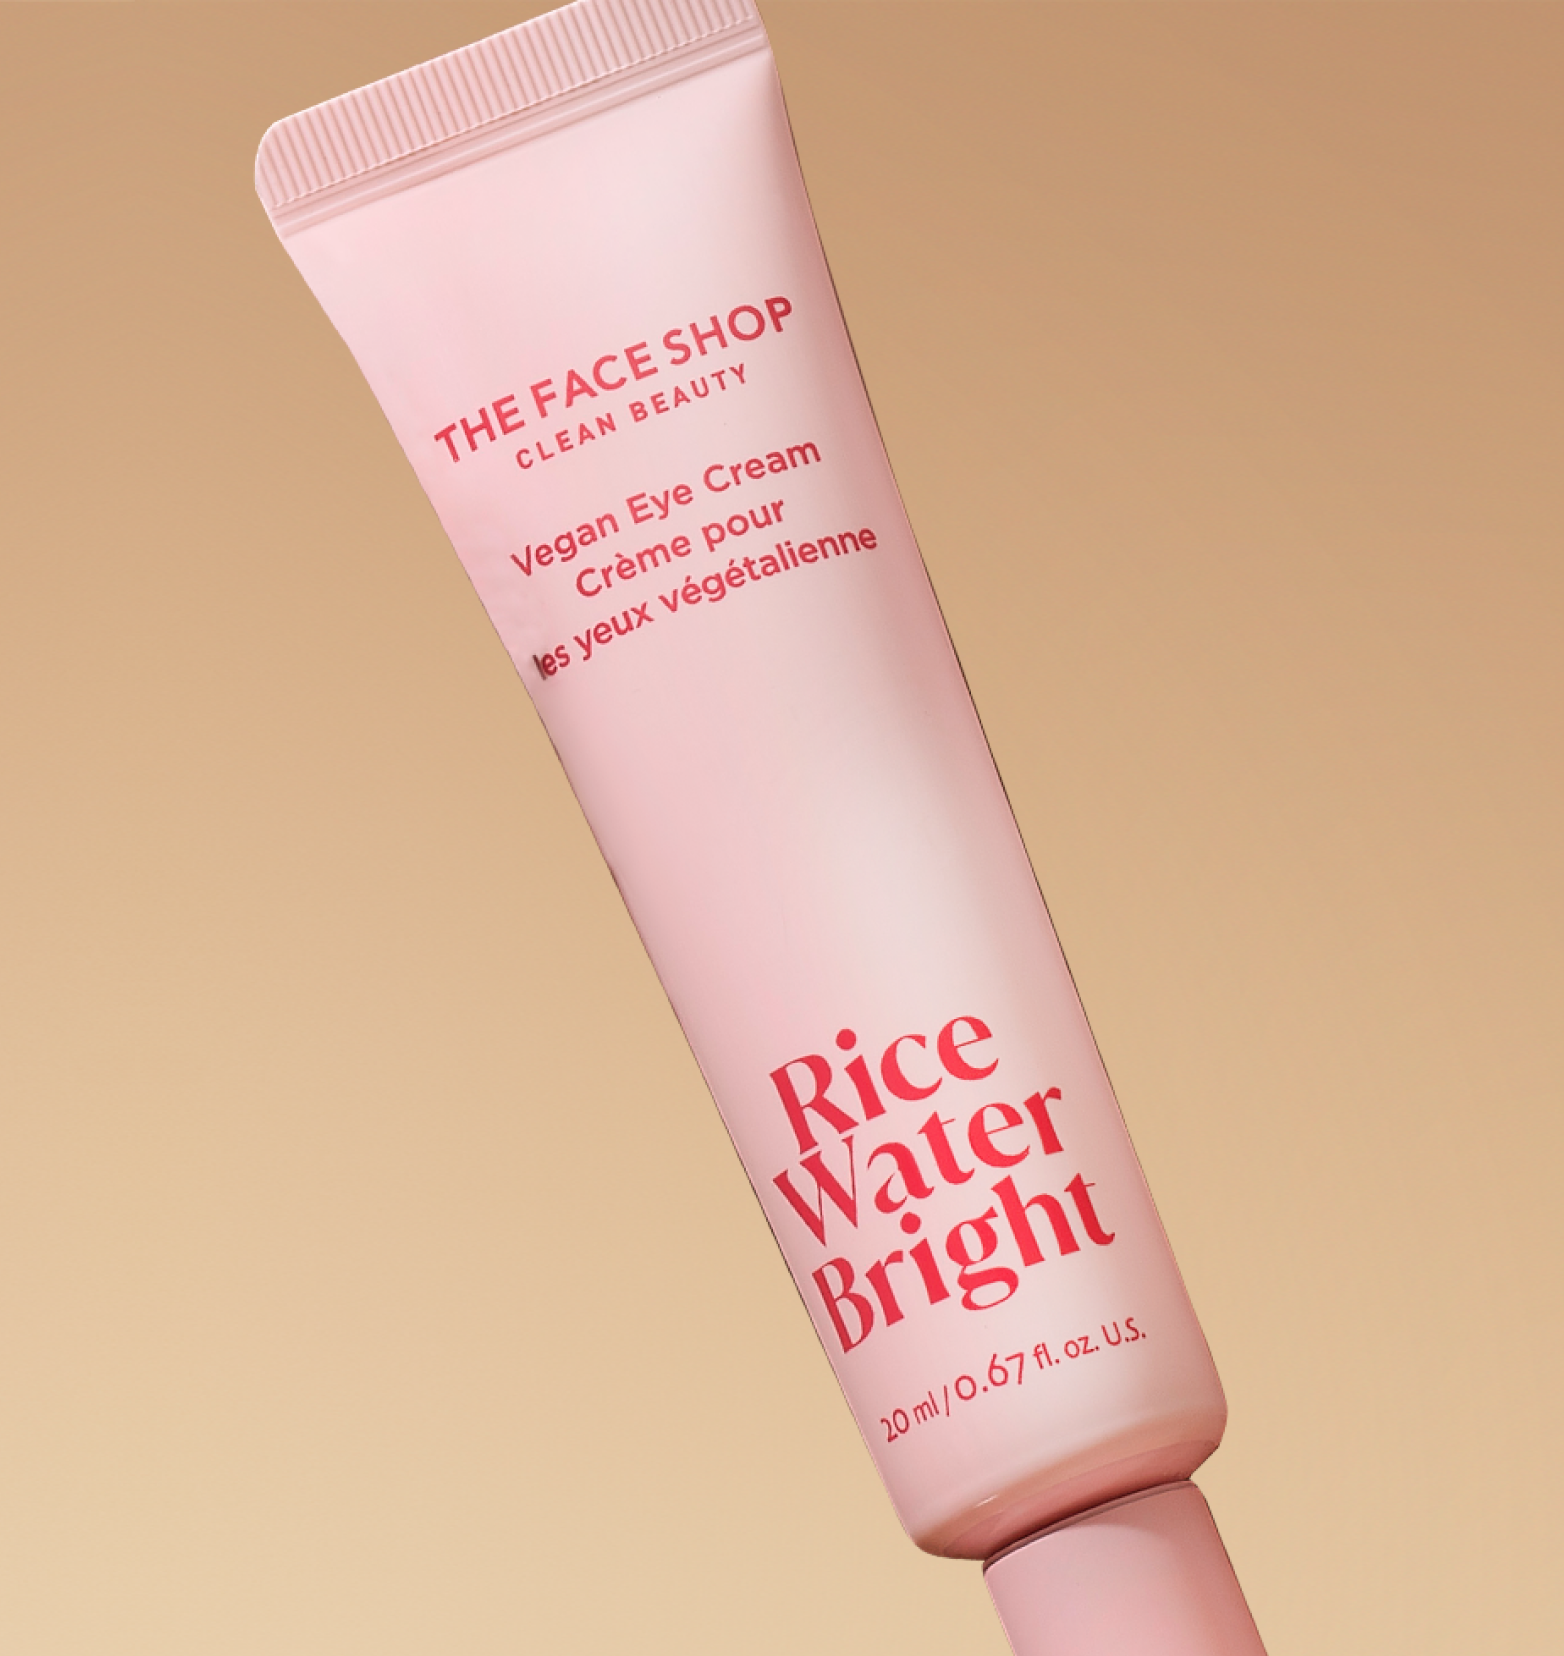 The Face Shop Rice Water Bright Vegan Eye Cream on a warm beige background